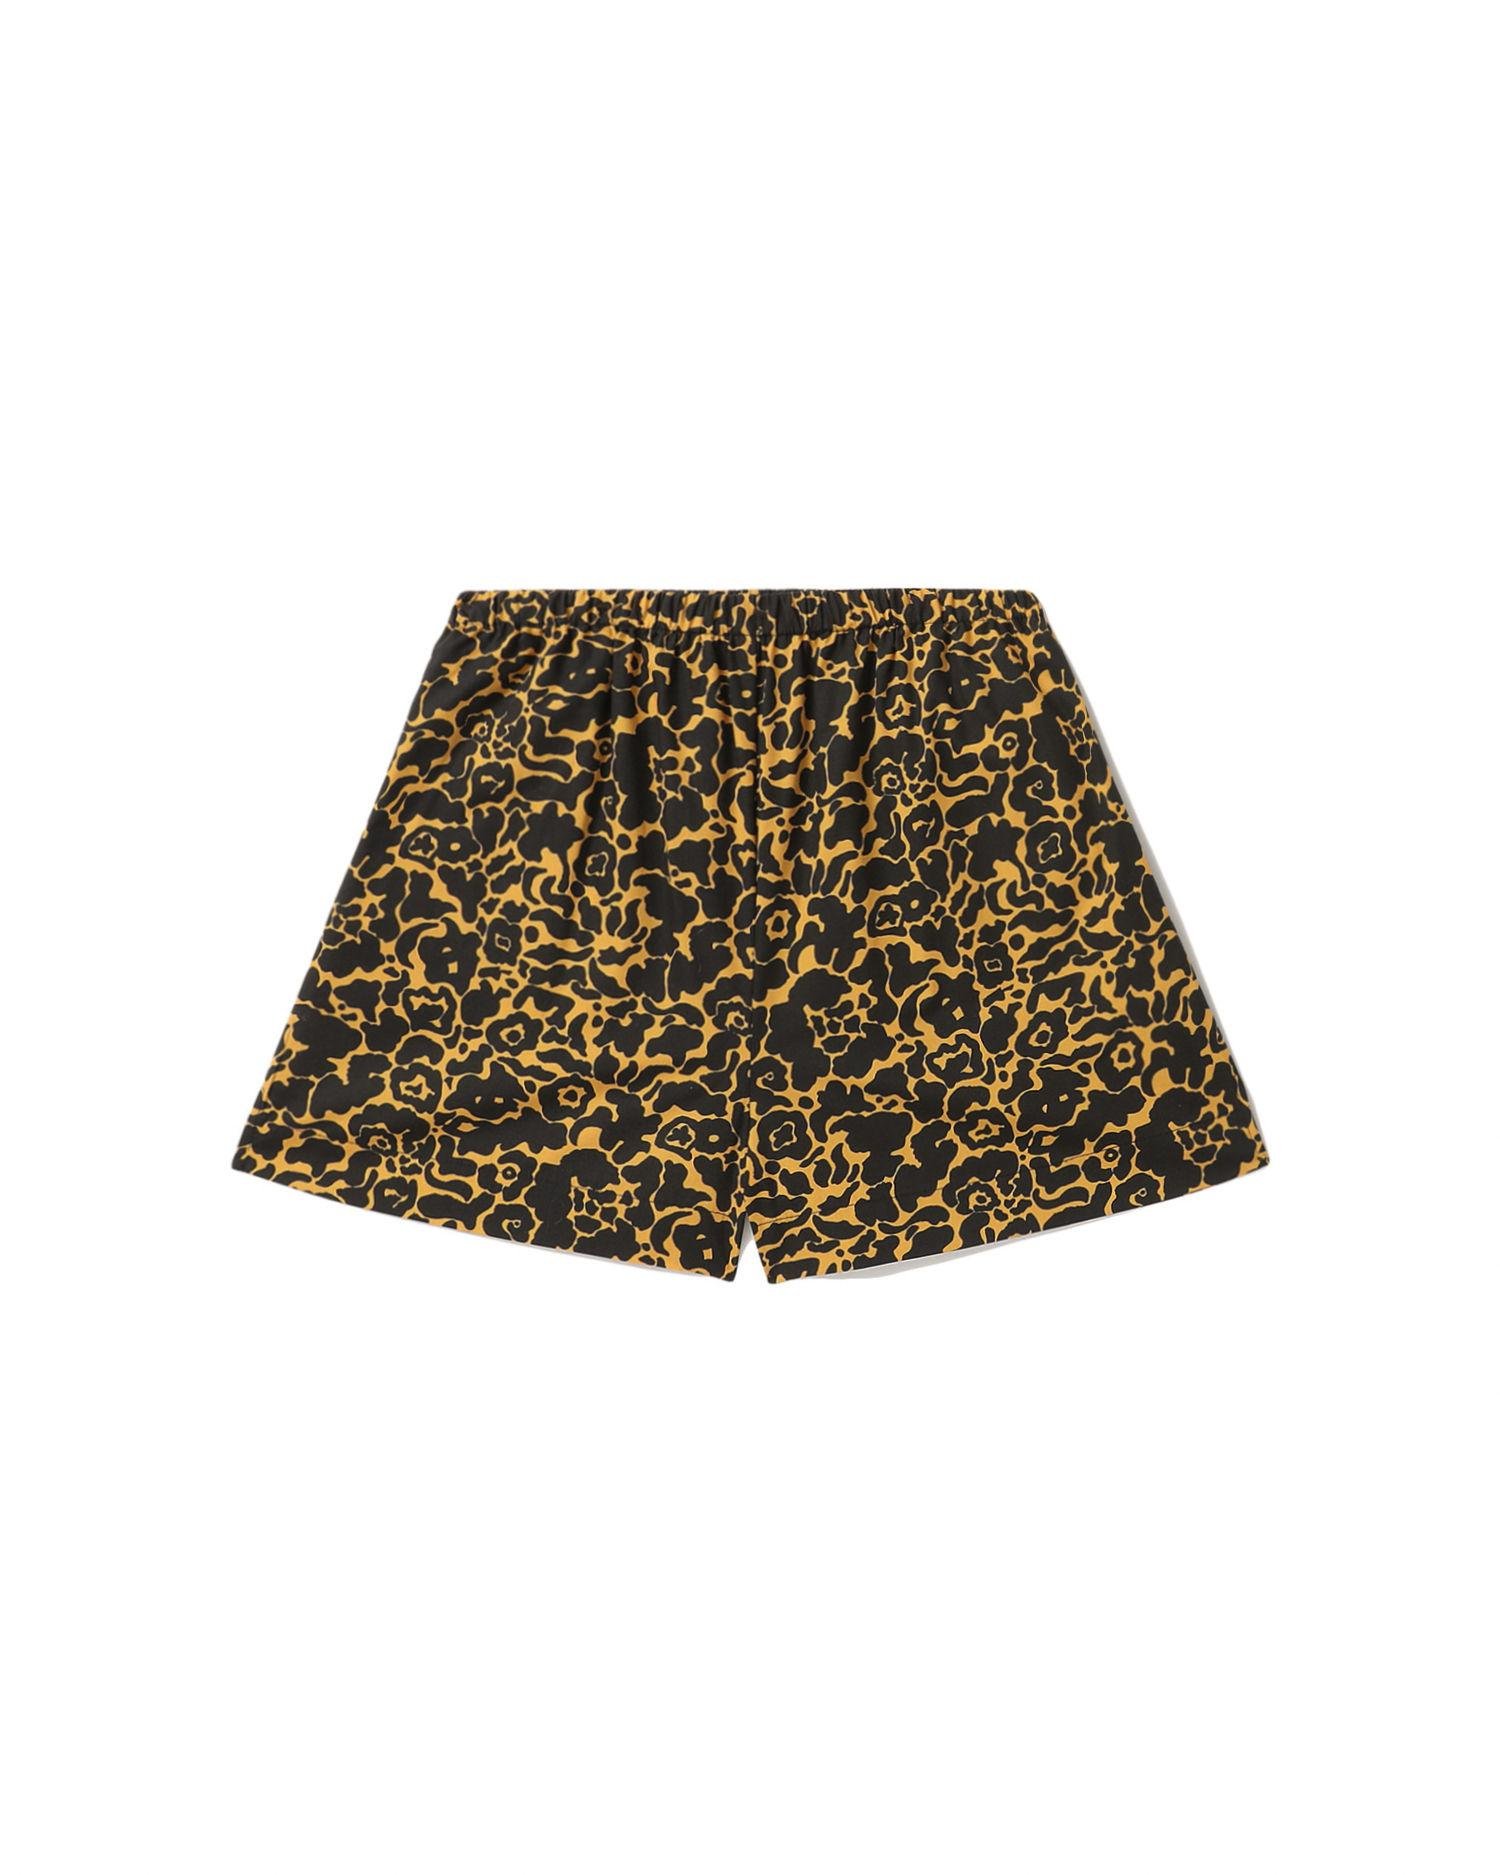 Graphic shorts by BEAUFILLE